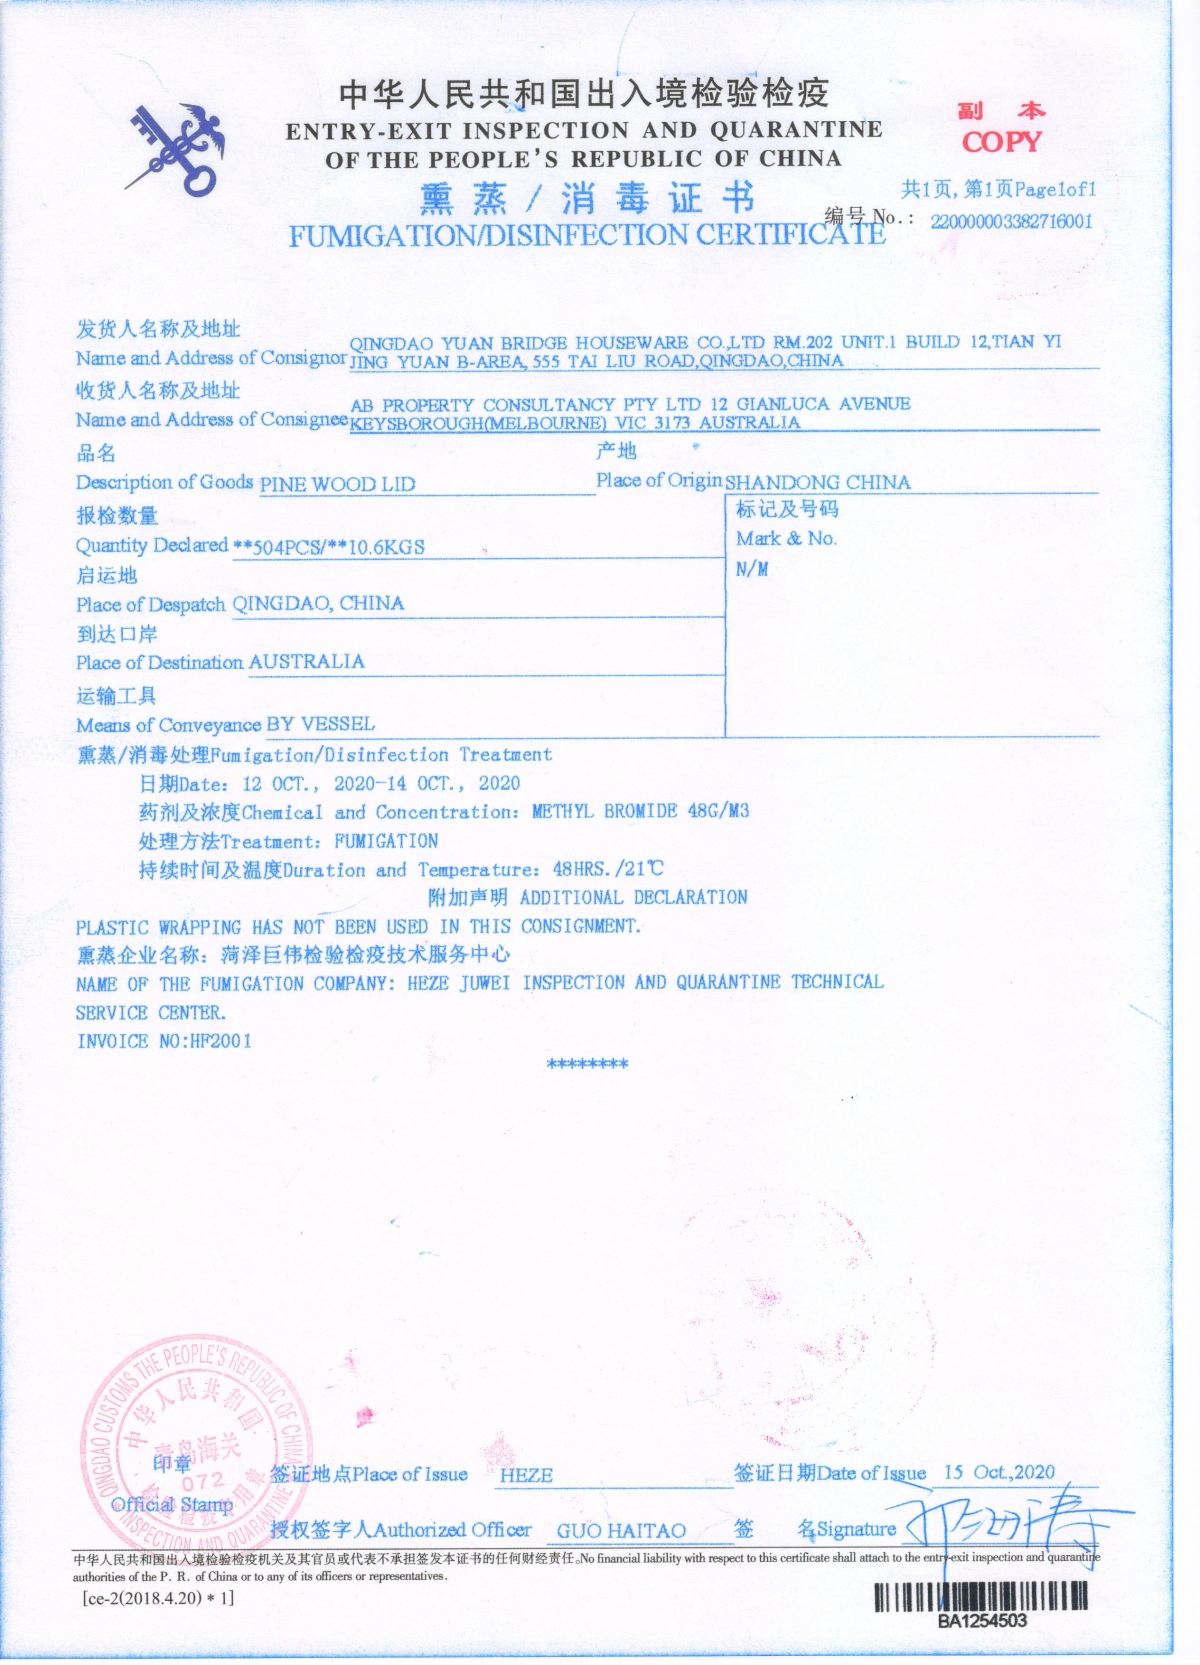 Fumigation Disinfection Certificate For Candle Wood Lids ,Exported To Australia ,China Factory ,Test Report-HOWCANDLE-Candles,Scented Candles,Aromatherapy Candles,Soy Candles,Vegan Candles,Jar Candles,Pillar Candles,Candle Gift Sets,Essential Oils,Reed Diffuser,Candle Holder,